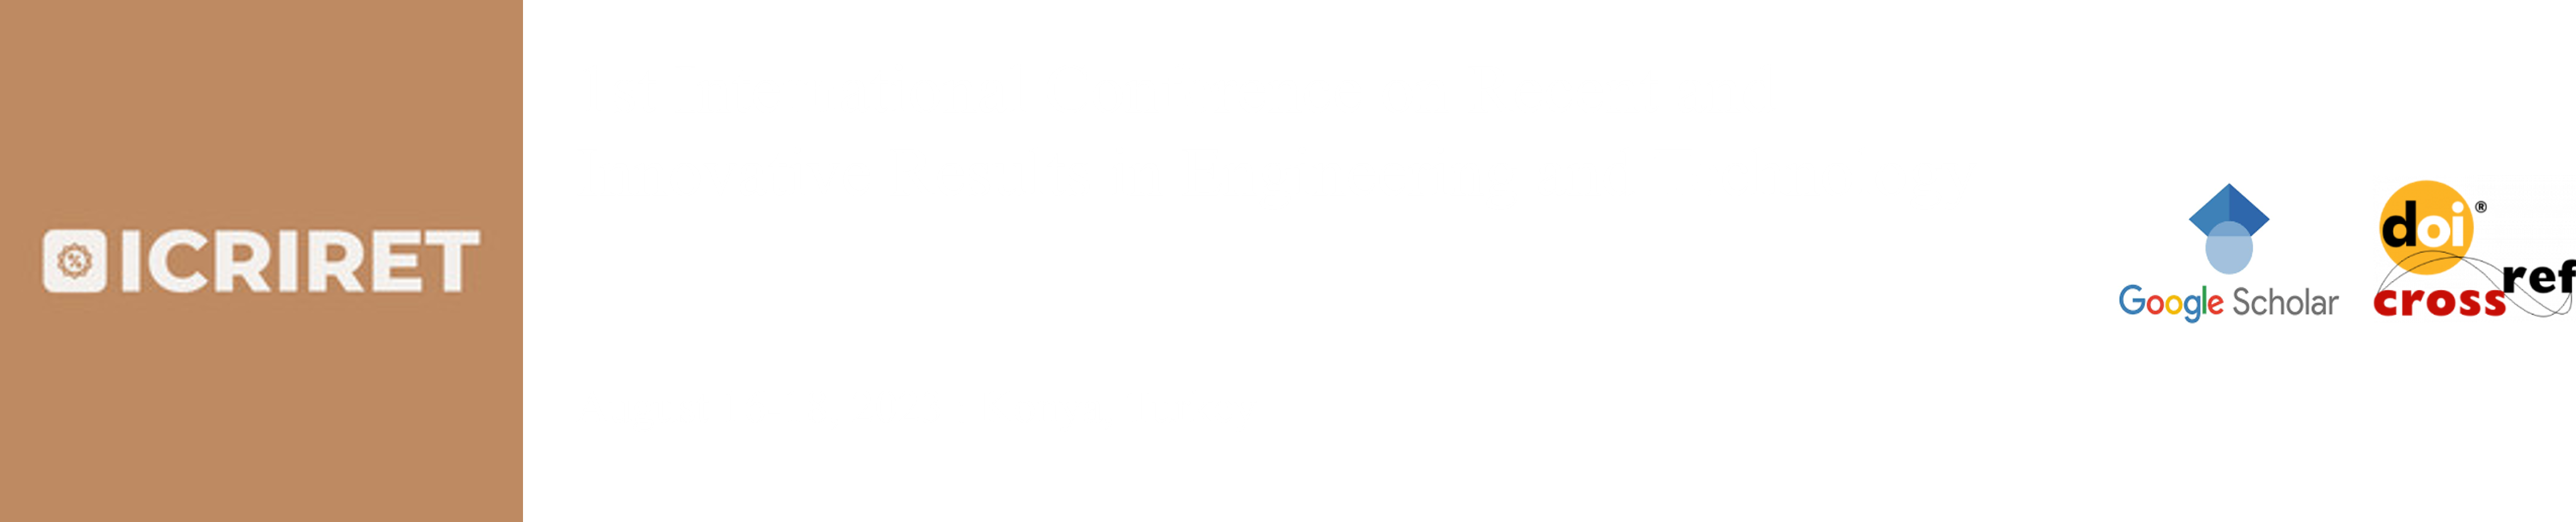 International Conference on Recent and Innovative Results in Engineering and Technology